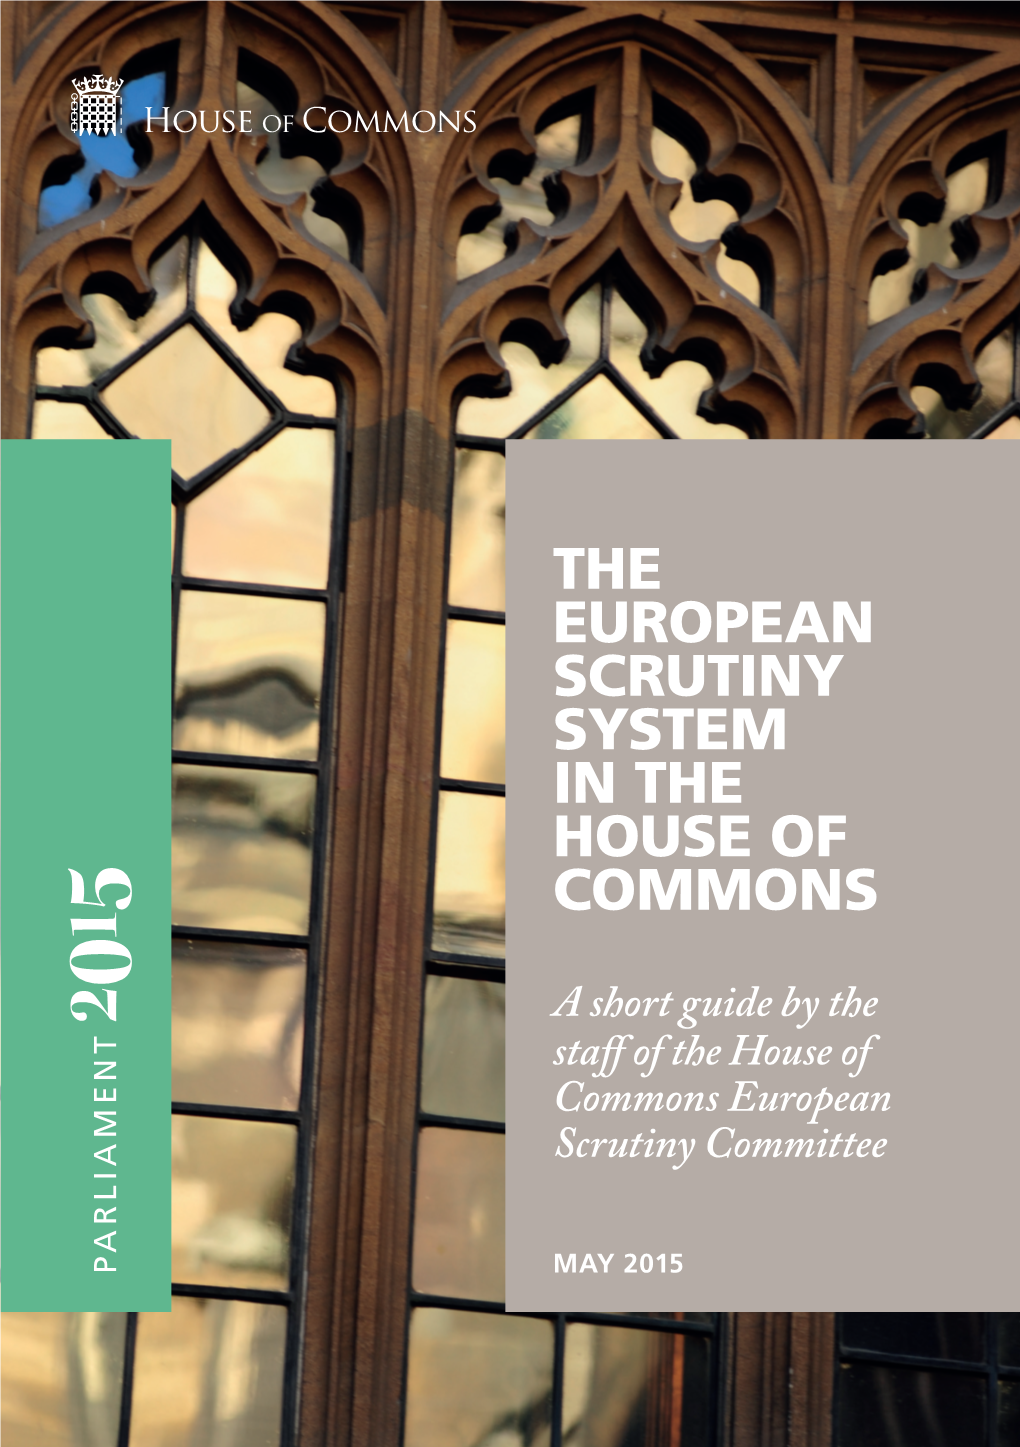 The European Scrutiny System in the House of Commons 3 the European Scrutiny System in the House of Commons 4